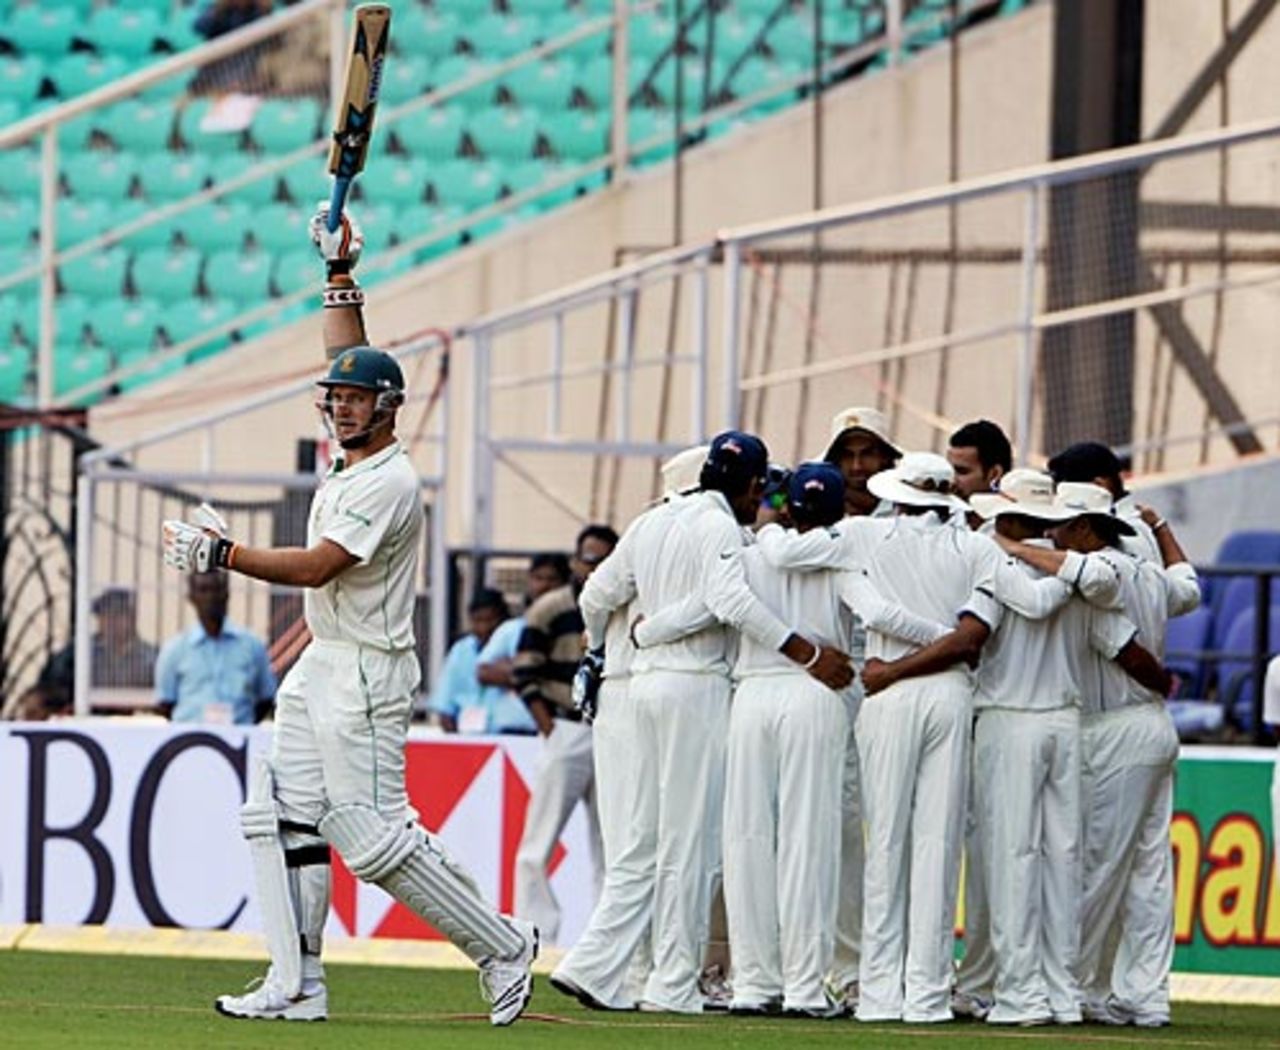 Graeme Smith walks out to bat, India v South Africa, 1st Test, Nagpur, 1st day, February 6, 2010